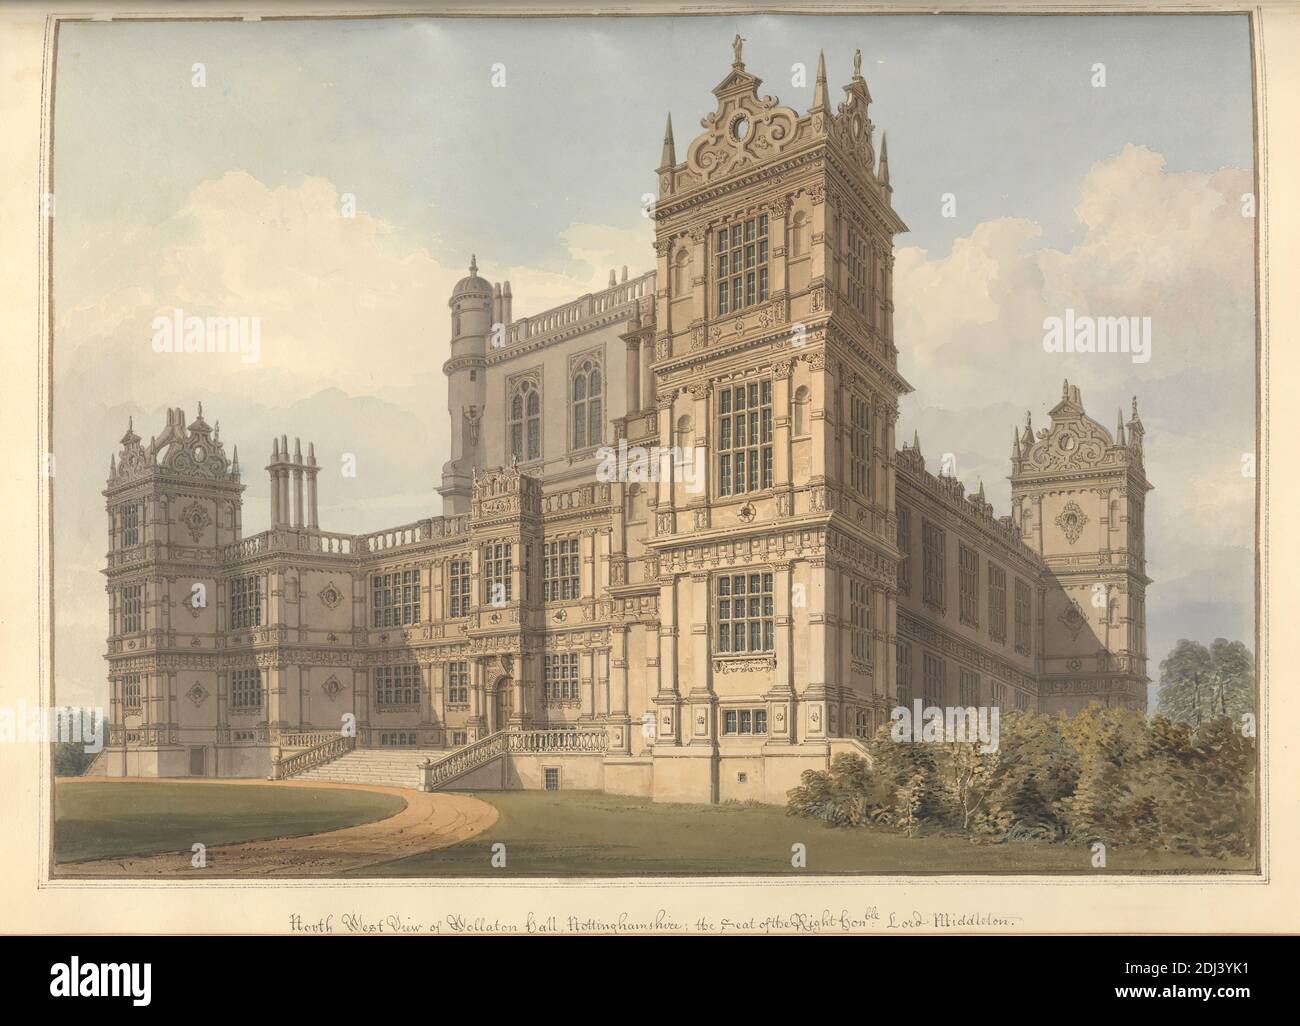 North West View of Wollaton hall, Nottinghamshire; the Seat of the Right hon'ble Lord Middleton, John Buckler FSA, 1770–1851, British, and John Chessell Buckler, 1793–1894, British, 1812, Watercolor and pen and black ink on moderately thick, cream wove paper, Sheet: 14 × 19 3/4 inches (35.6 × 50.2 cm) and Image: 13 × 18 1/4 inches (33 × 46.4 cm), architectural subject, balustrades, country house, Elizabethan, Jacobean, mullions, muntins, pilasters, turrets, windows, England, Europe, Nottinghamshire, United Kingdom, Wollaton Stock Photo